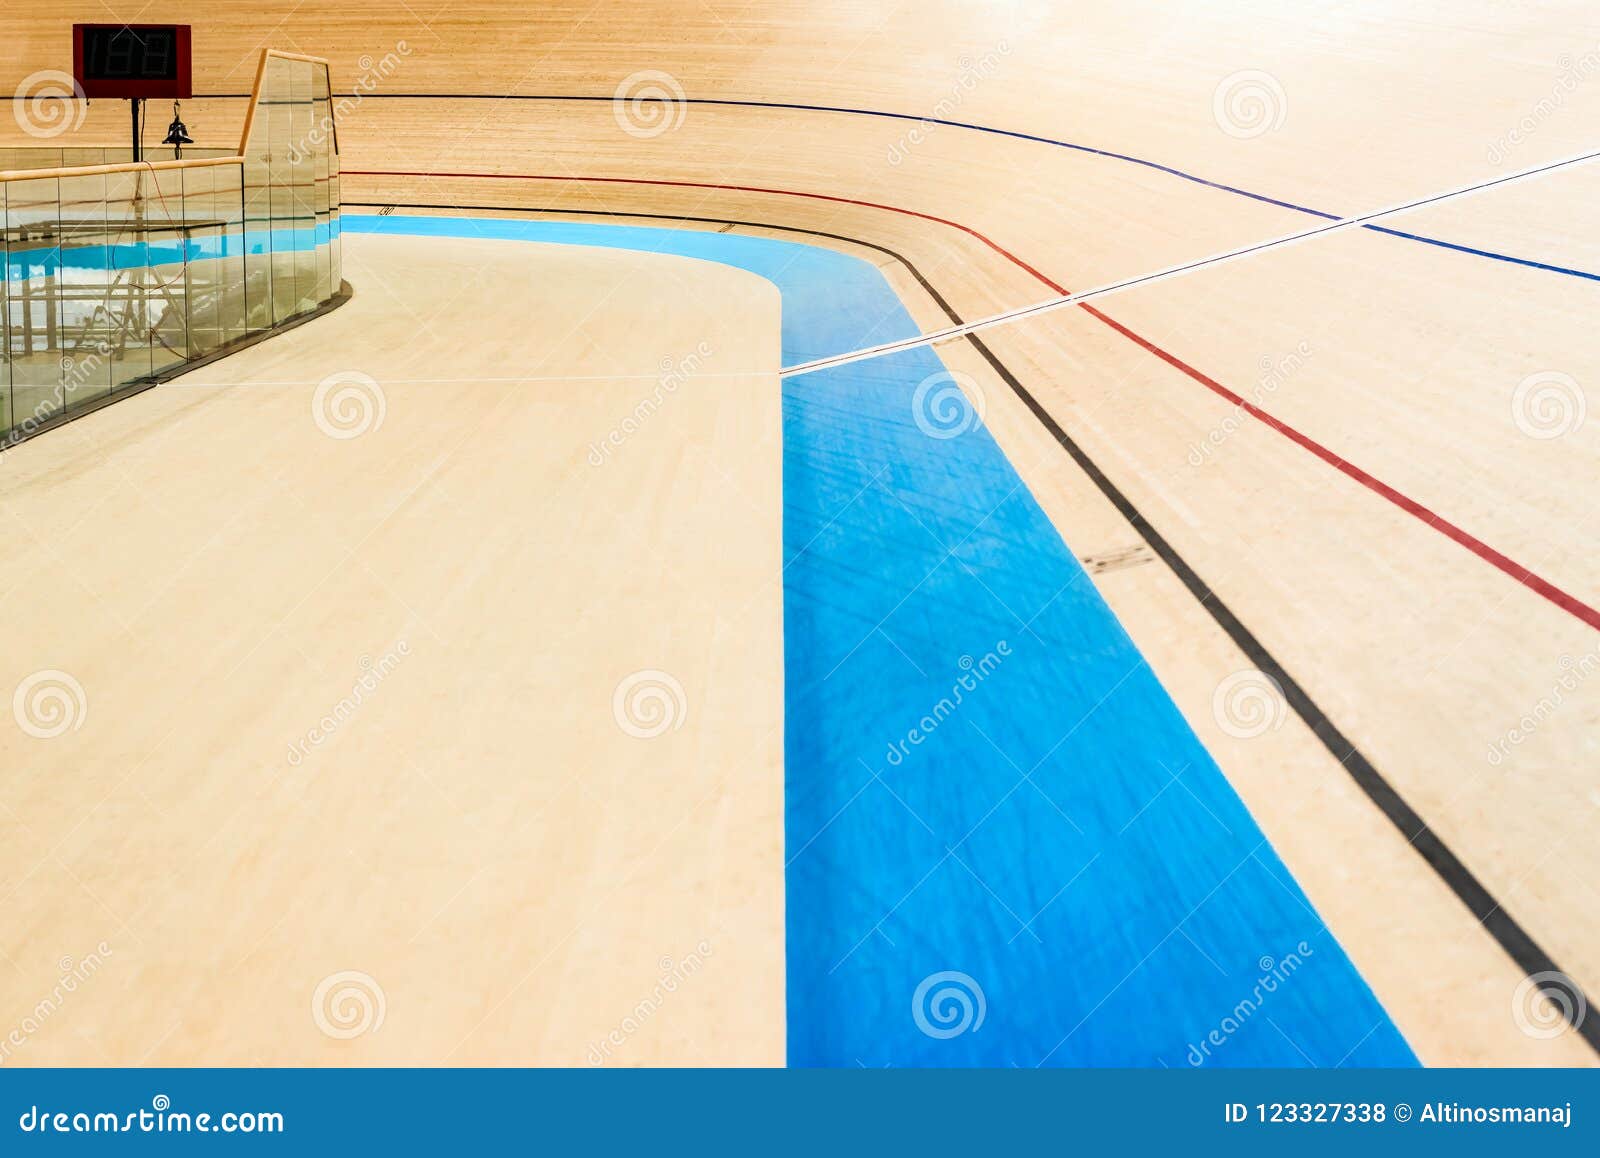 velodrome cycling track empty curved high wooden floor with markings